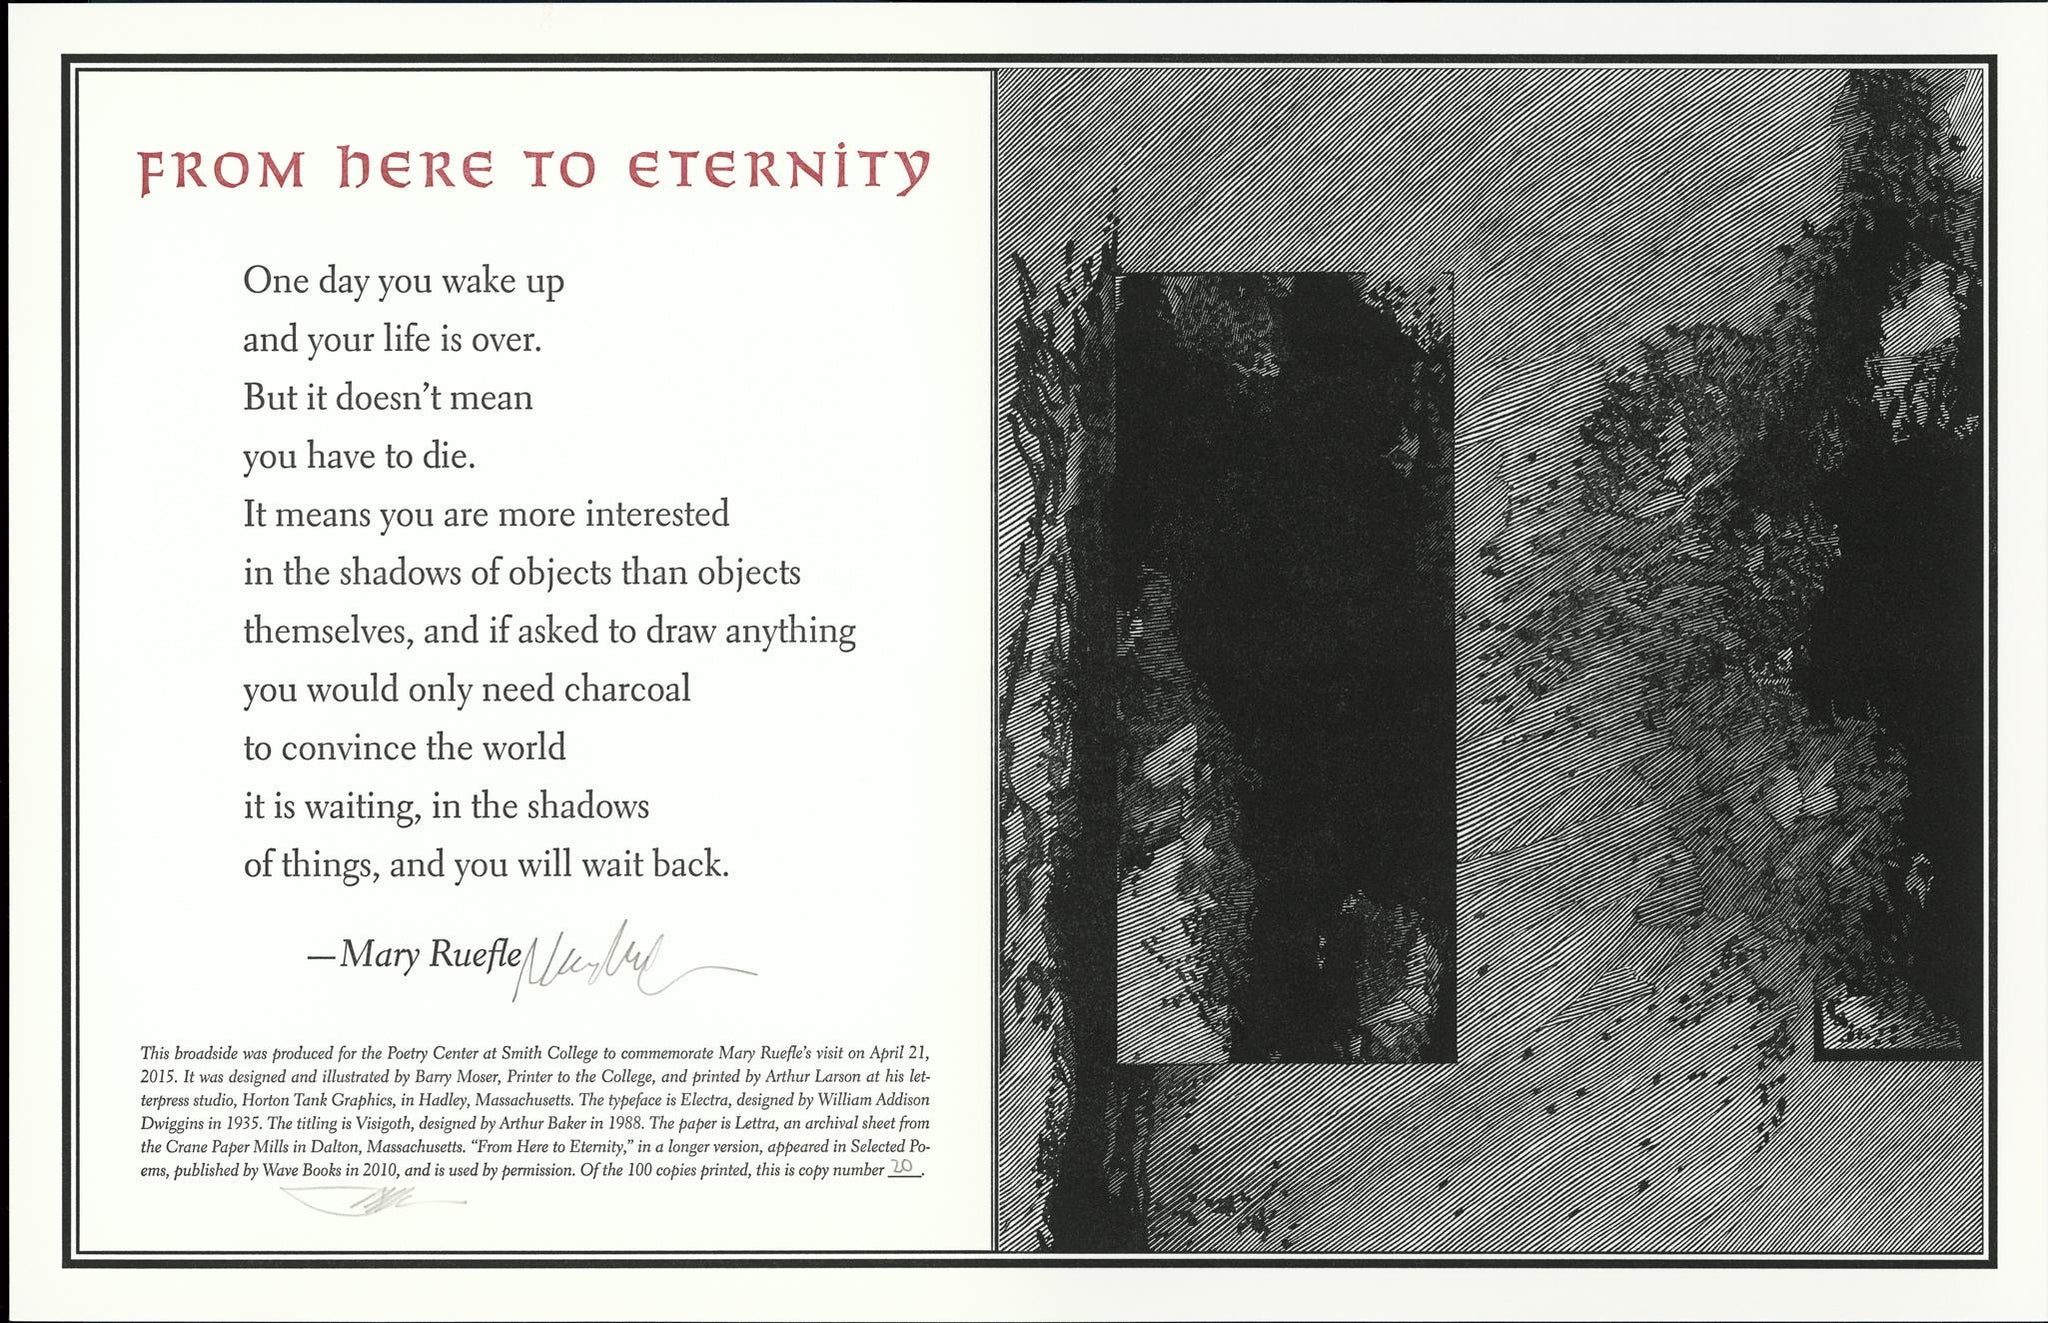 Mary Ruefle "From Here to Eternity" / Barry Moser Broadside